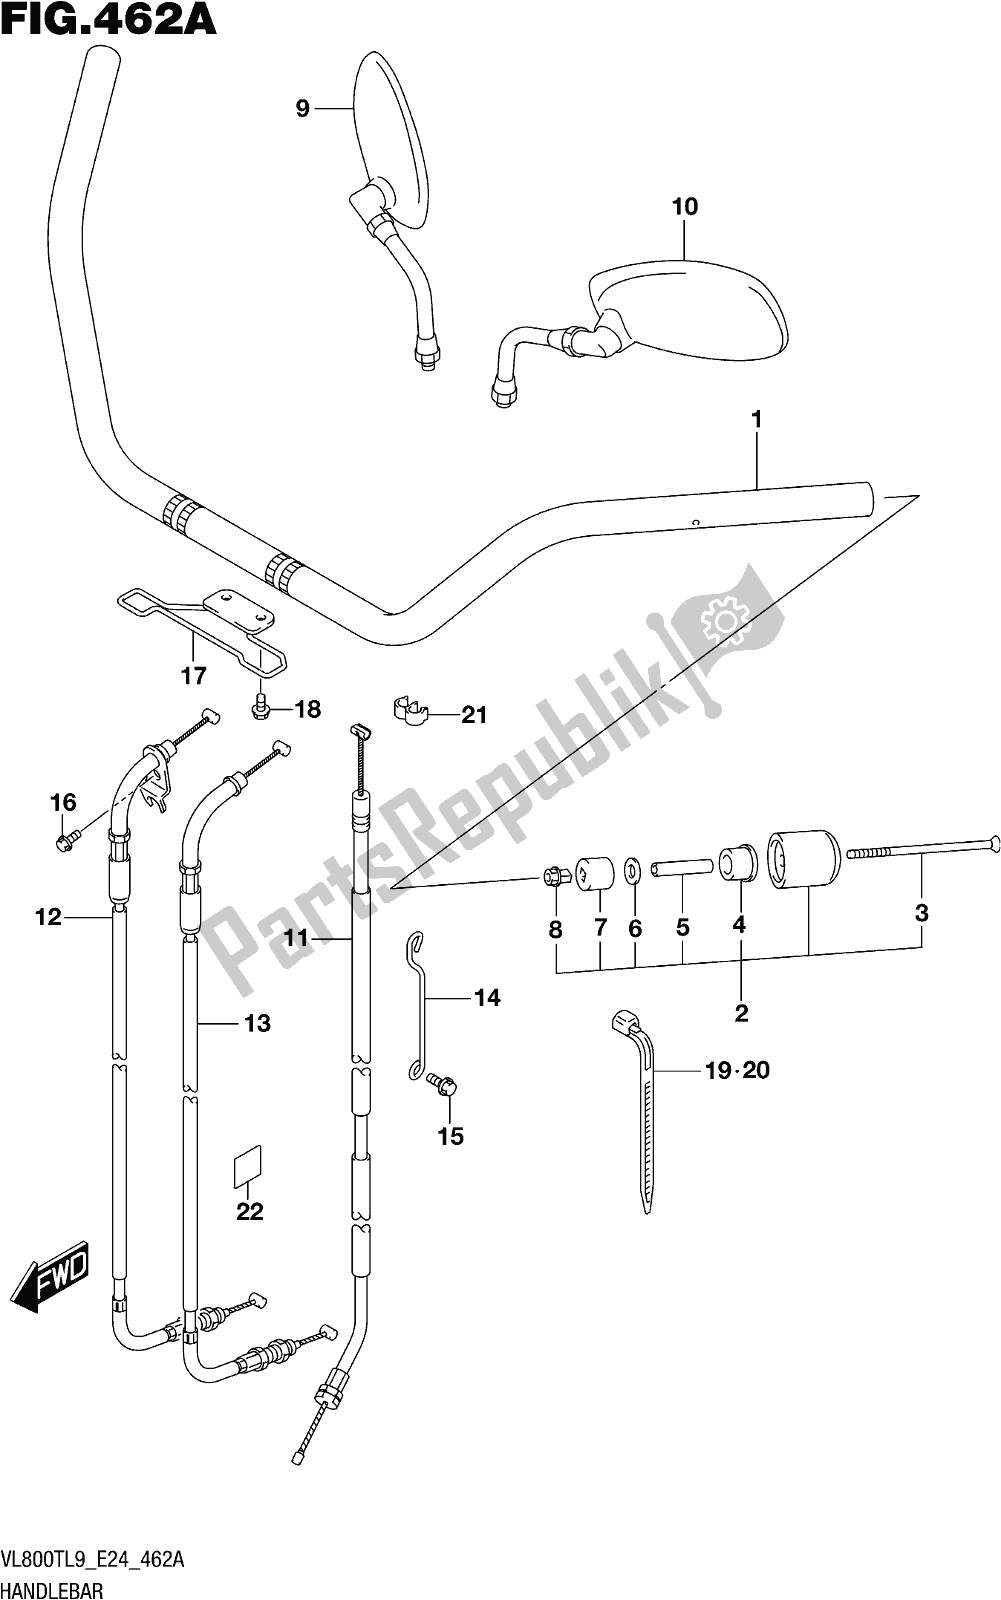 All parts for the Fig. 462a Handlebar of the Suzuki VL 800T 2019